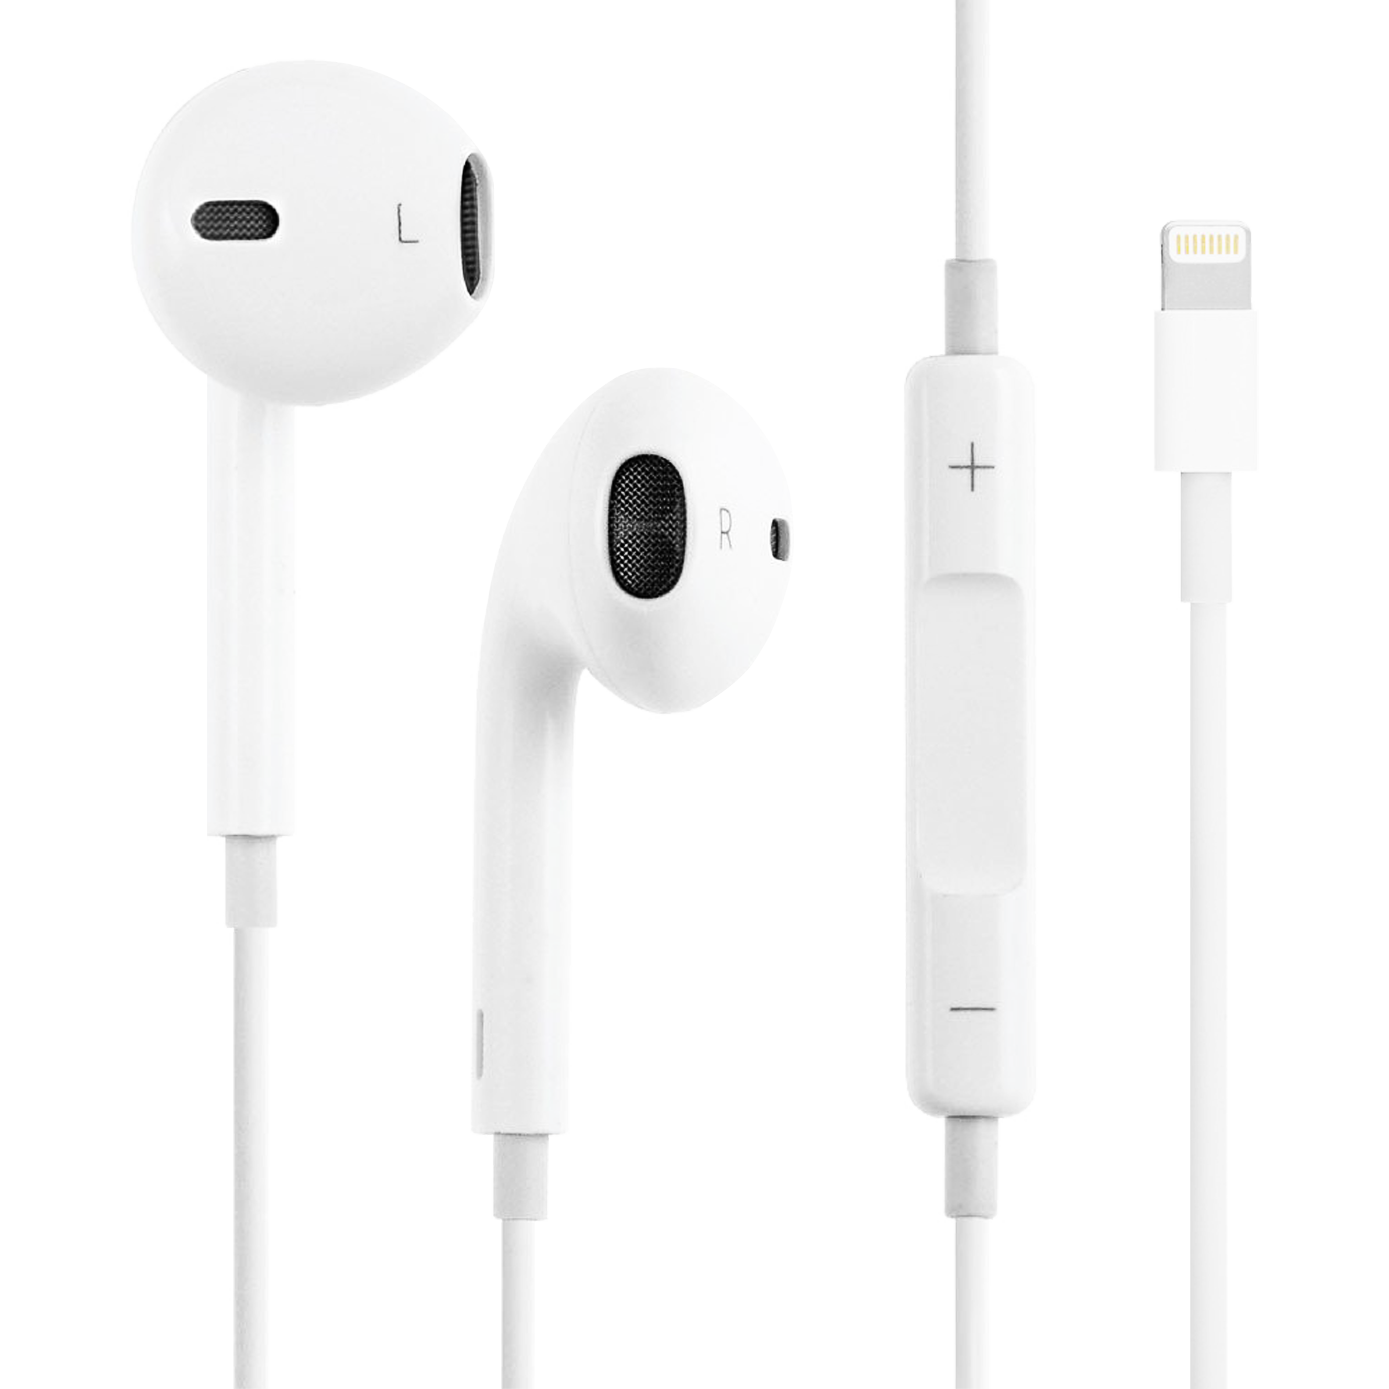 Apple EarPods Headphones with Lightning Connector, Wired Ear Buds for  iPhone with Built-in Remote to Control Music, Phone Calls, and Volume :  Electronics 